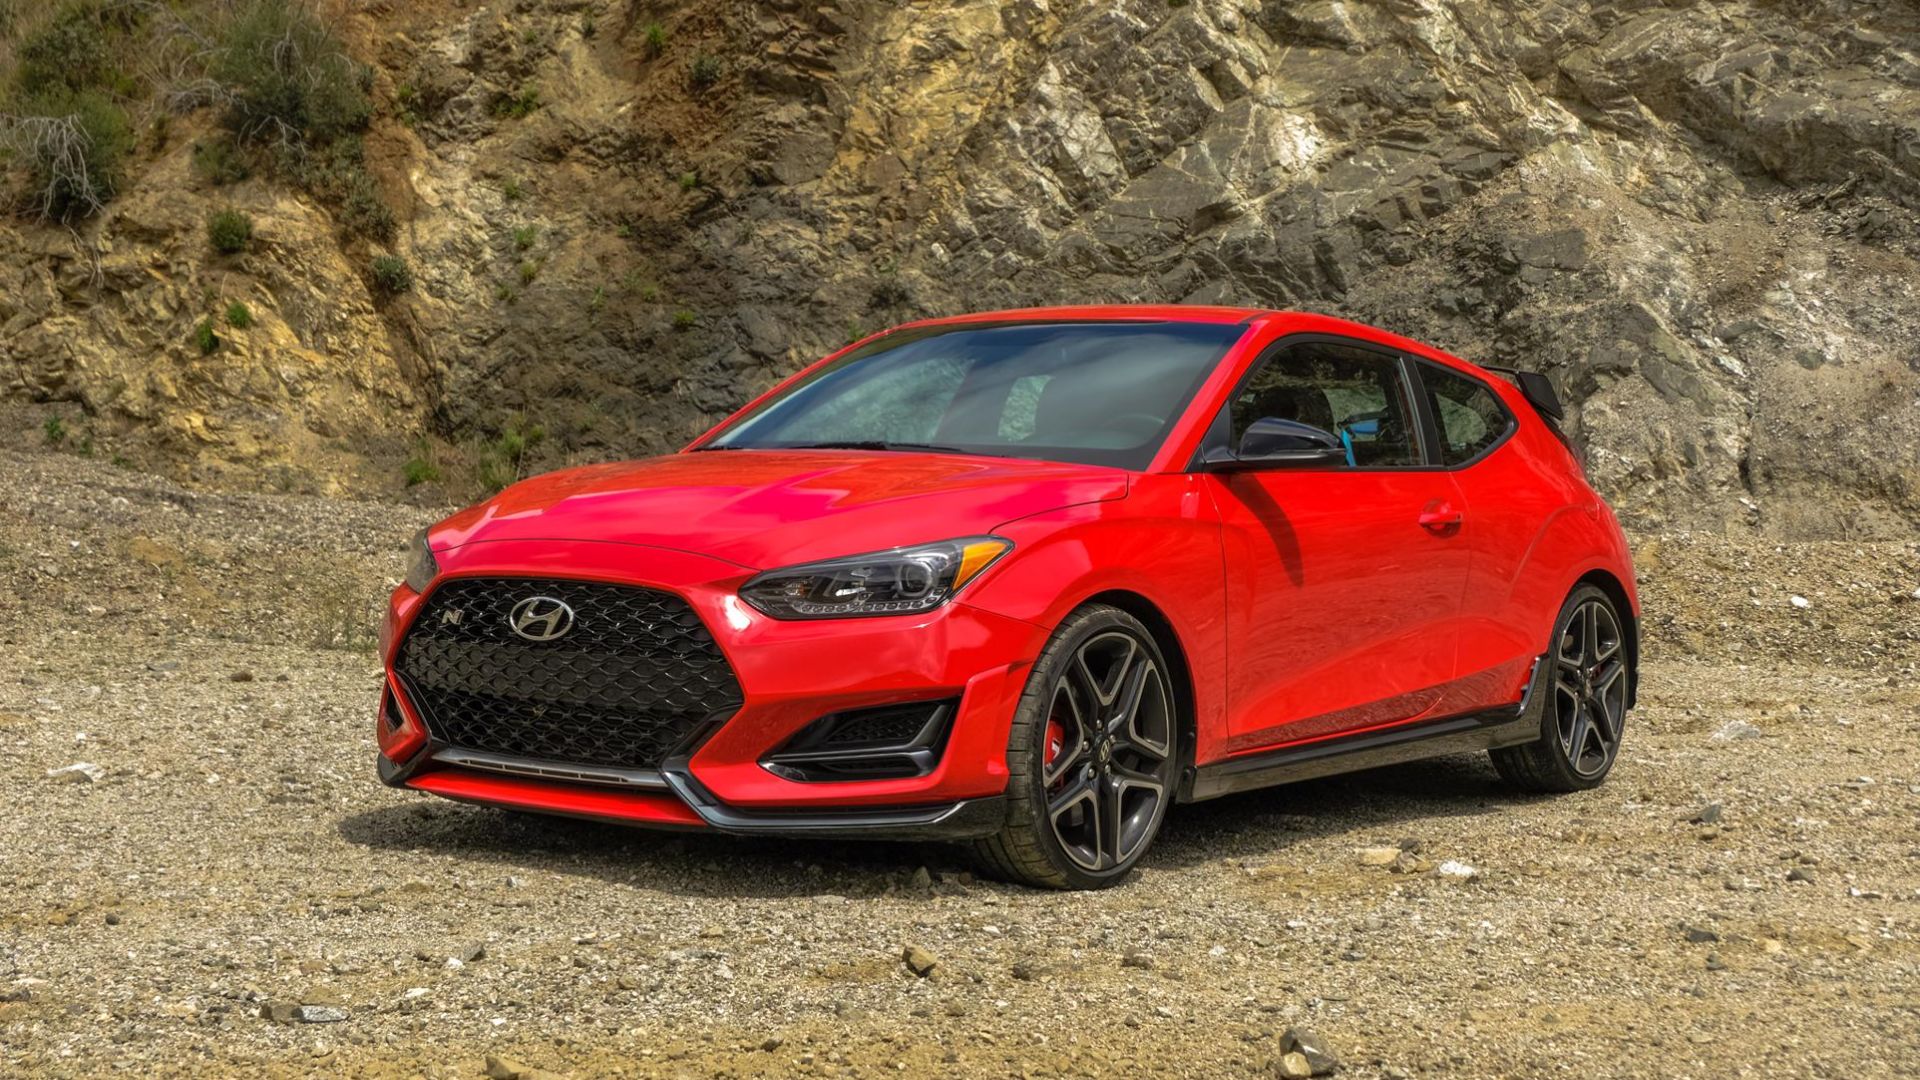 2020 Hyundai Veloster N Review: A Hot Hatch That Forgets It’s a Daily Driver, Too